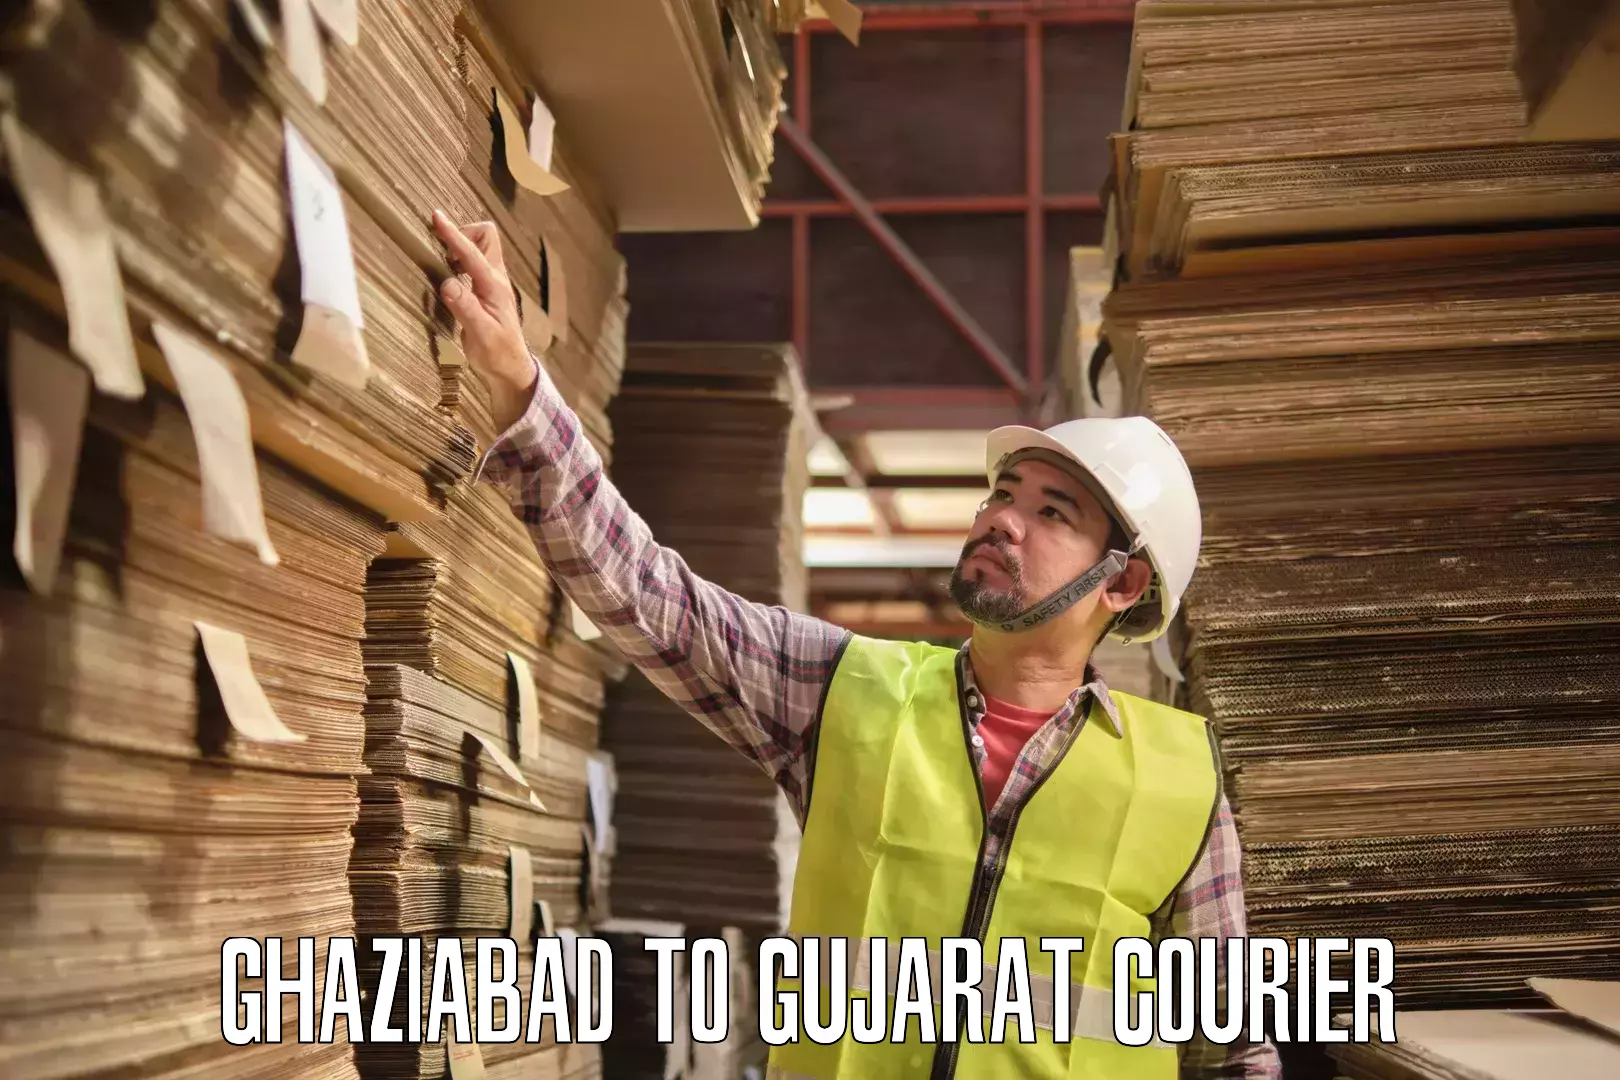 High-speed parcel service Ghaziabad to Surat